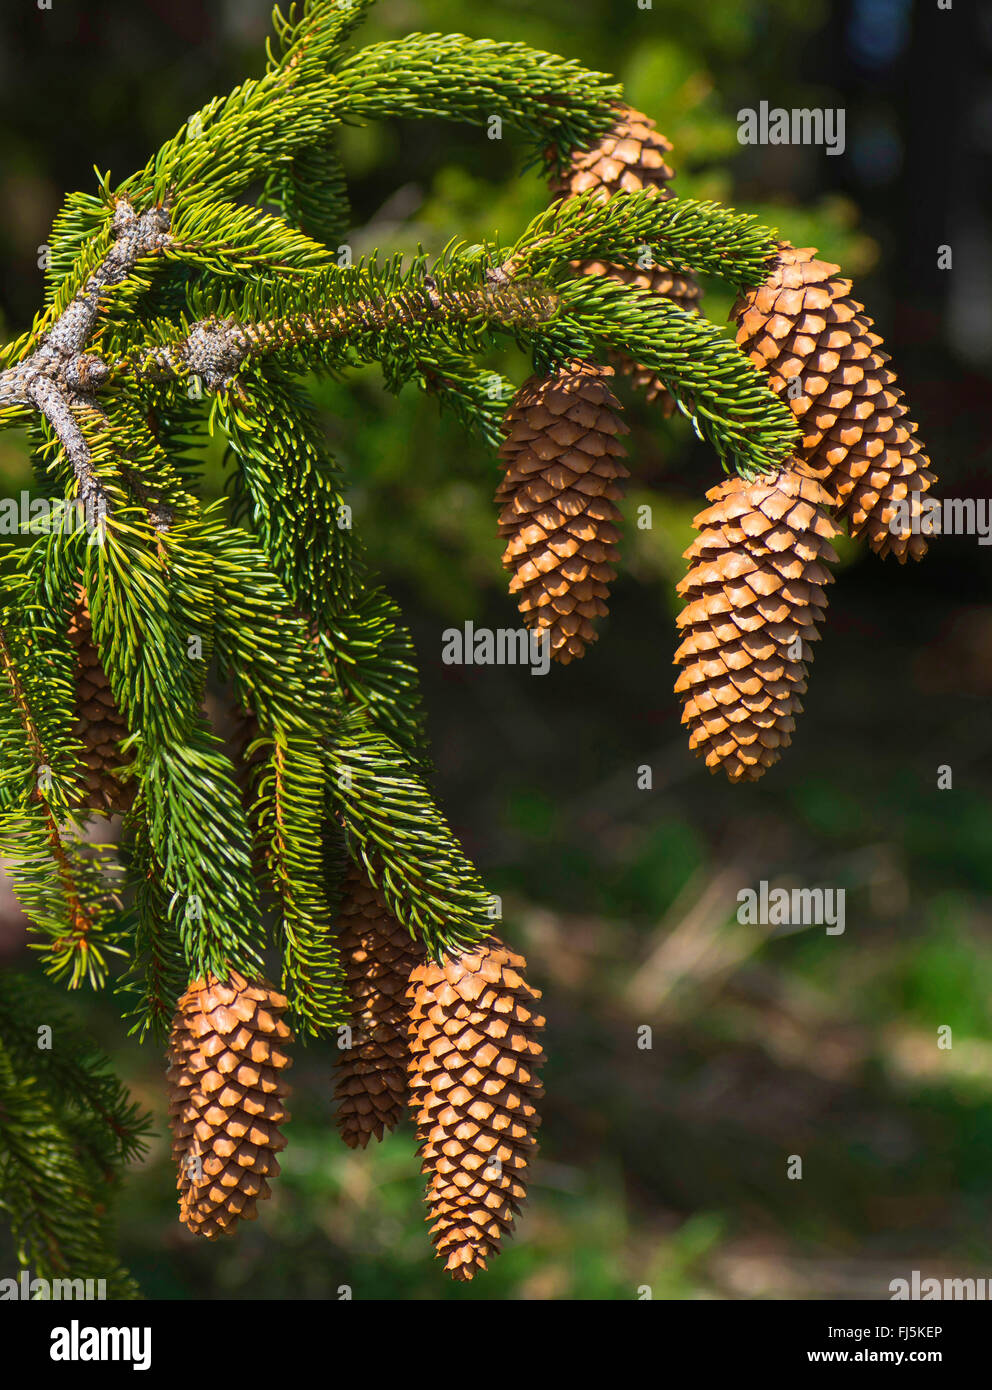 Norway spruce (Picea abies), open spruce cones on a spruce branch, Germany, Bavaria, Oberbayern, Upper Bavaria Stock Photo